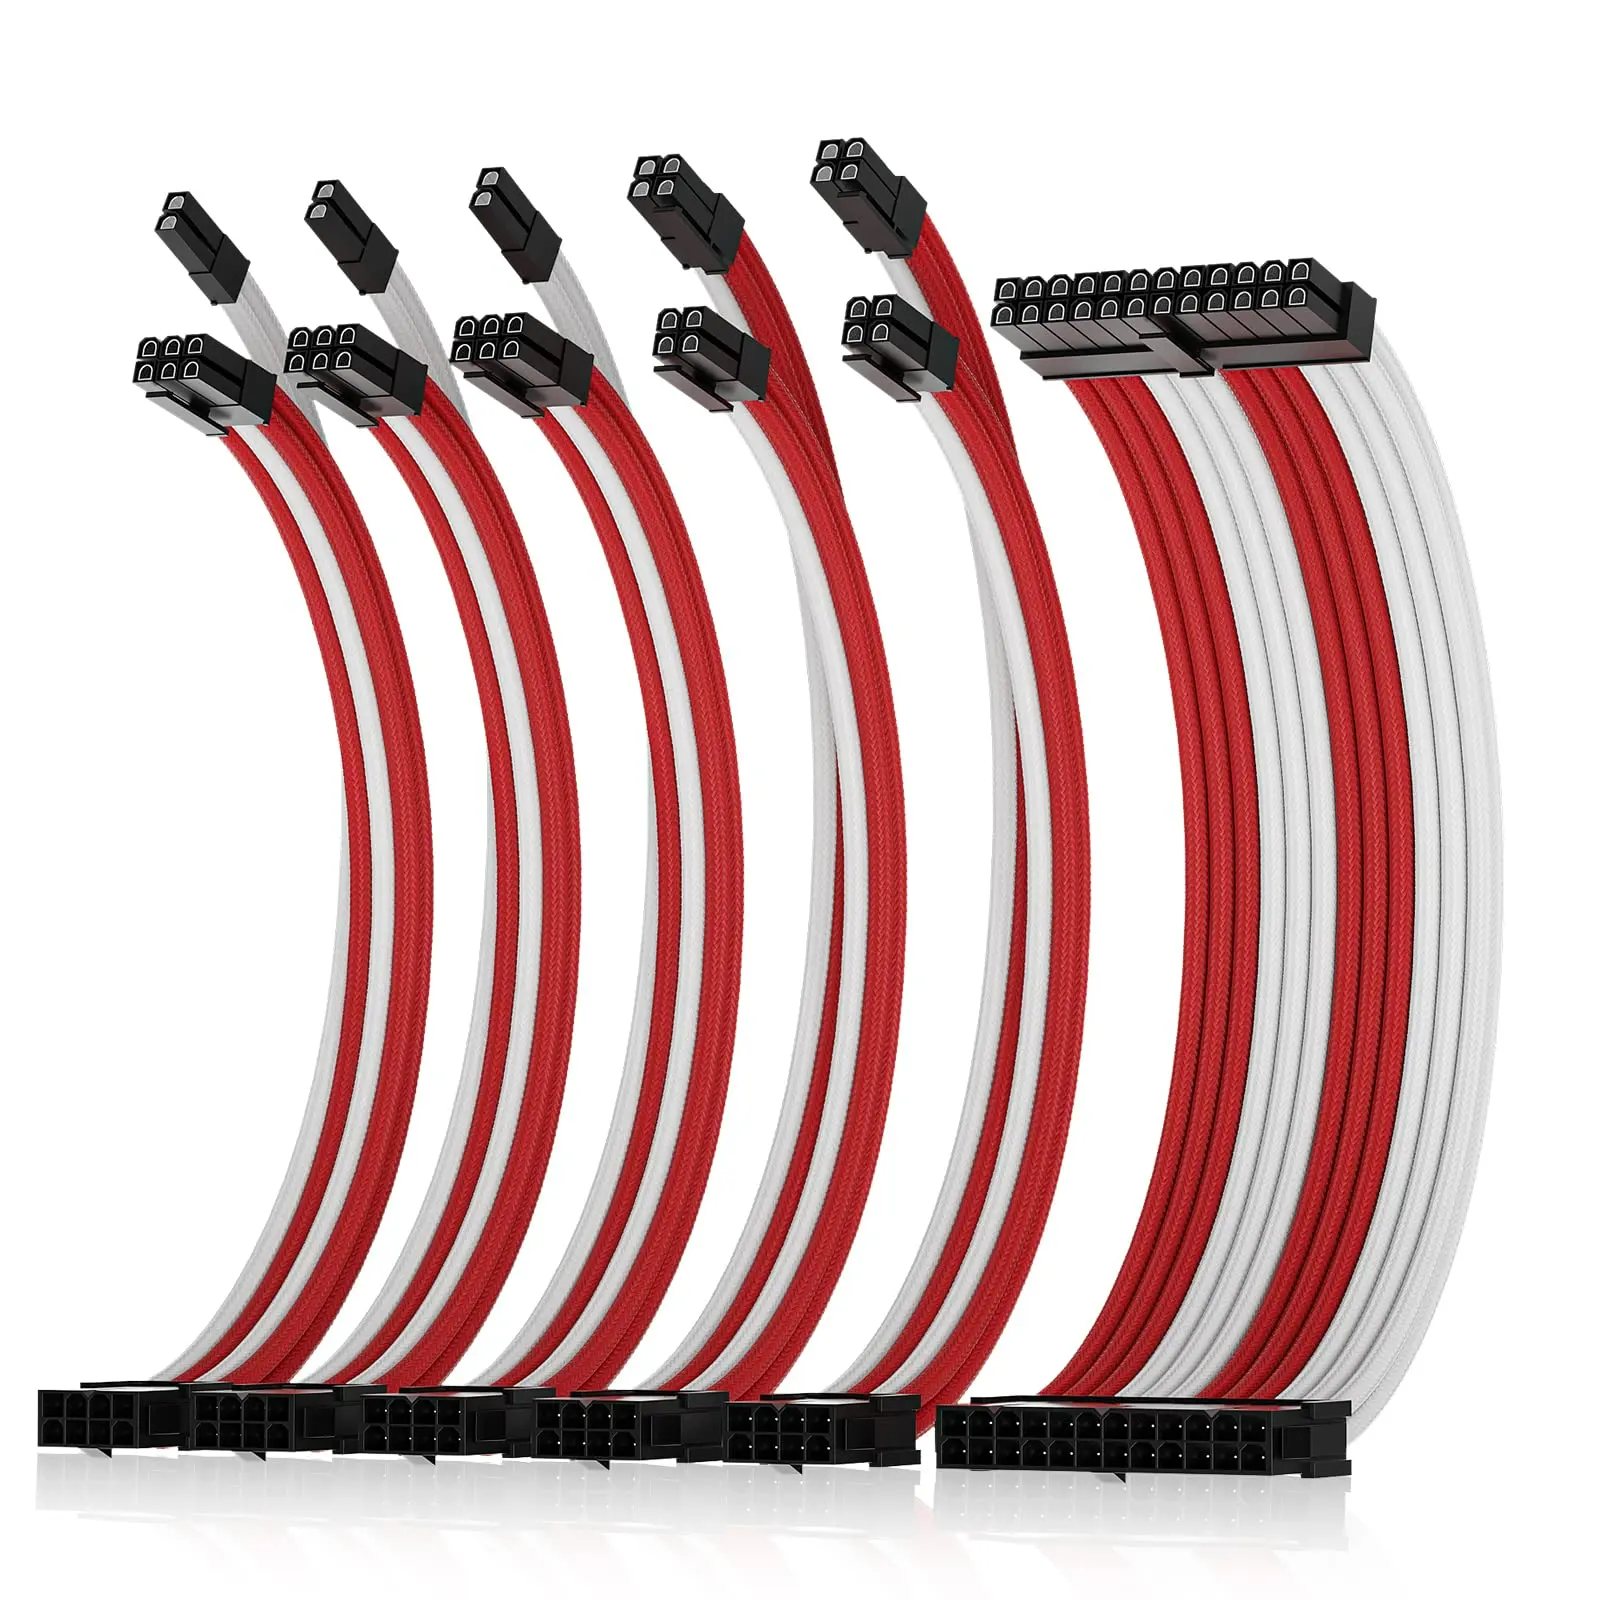 Power Supply with Extra-Sleeved 24-PIN 6-PIN 4+4 PIN Sleeve Extension Power Supply Cable Kit